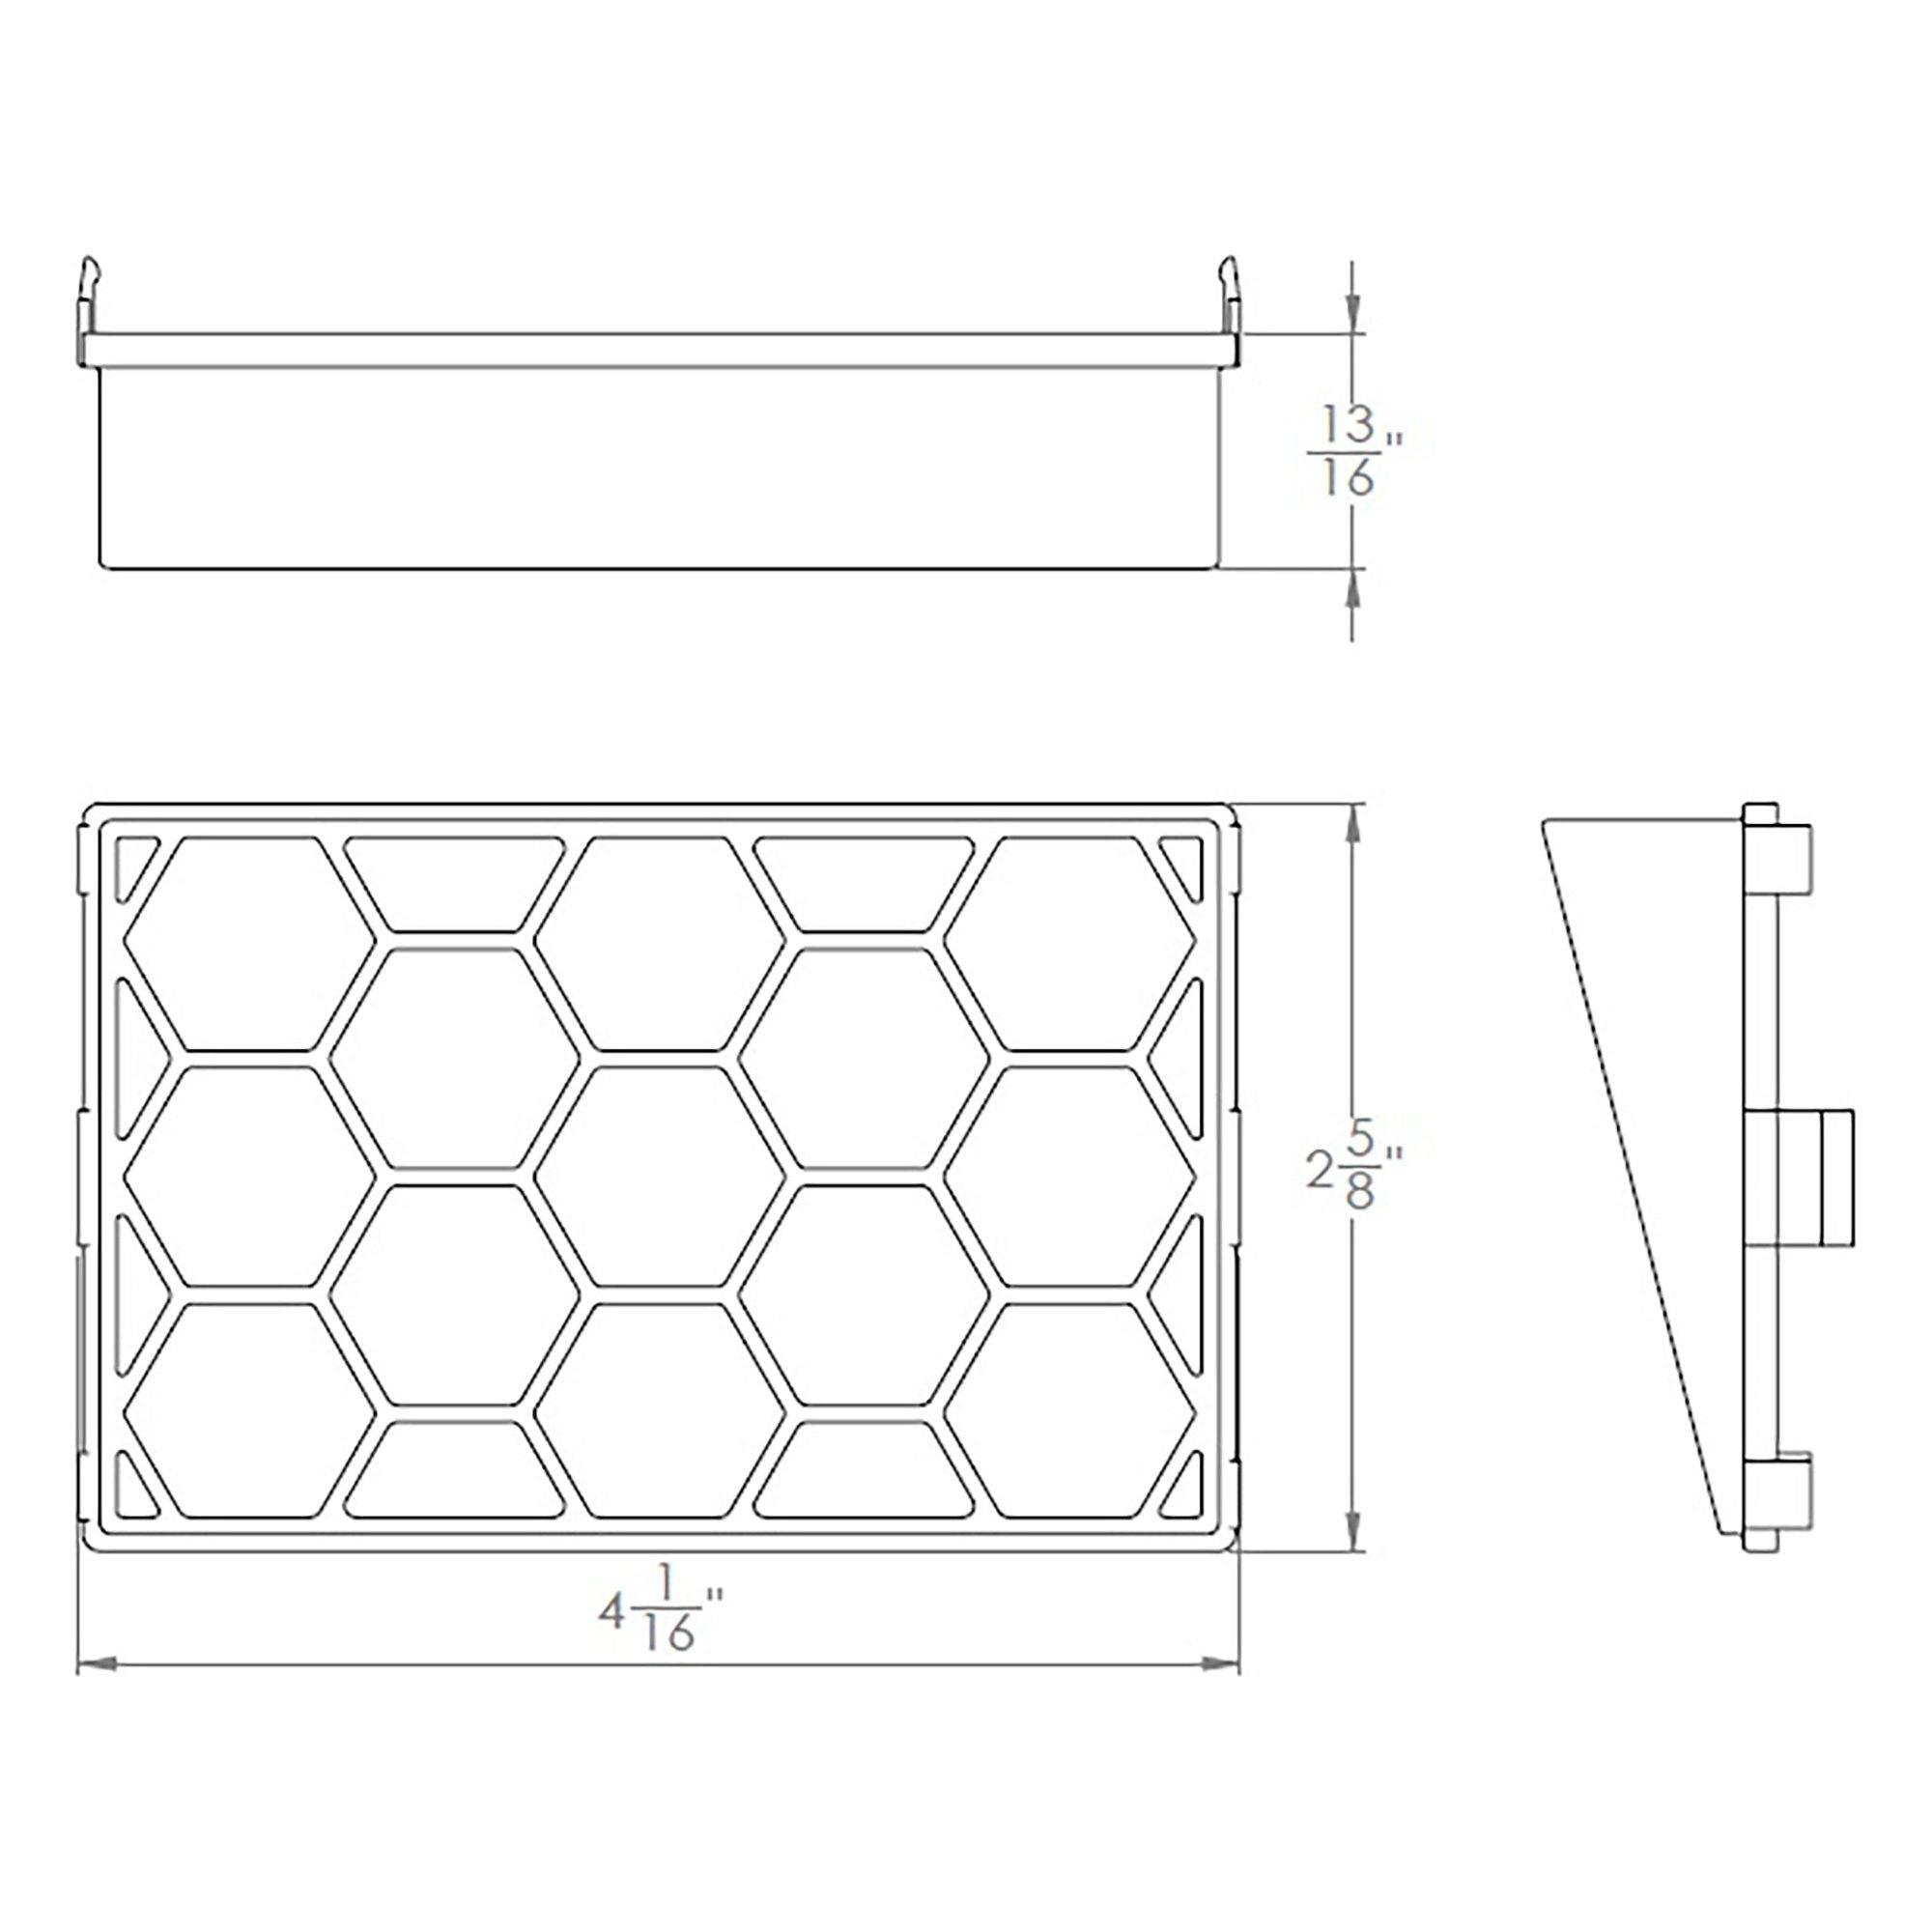 WAC Lighting - Snap-on Honeycomb Louver Glare Control for WAC Landscape Lighting Wall Wash - Lights Canada